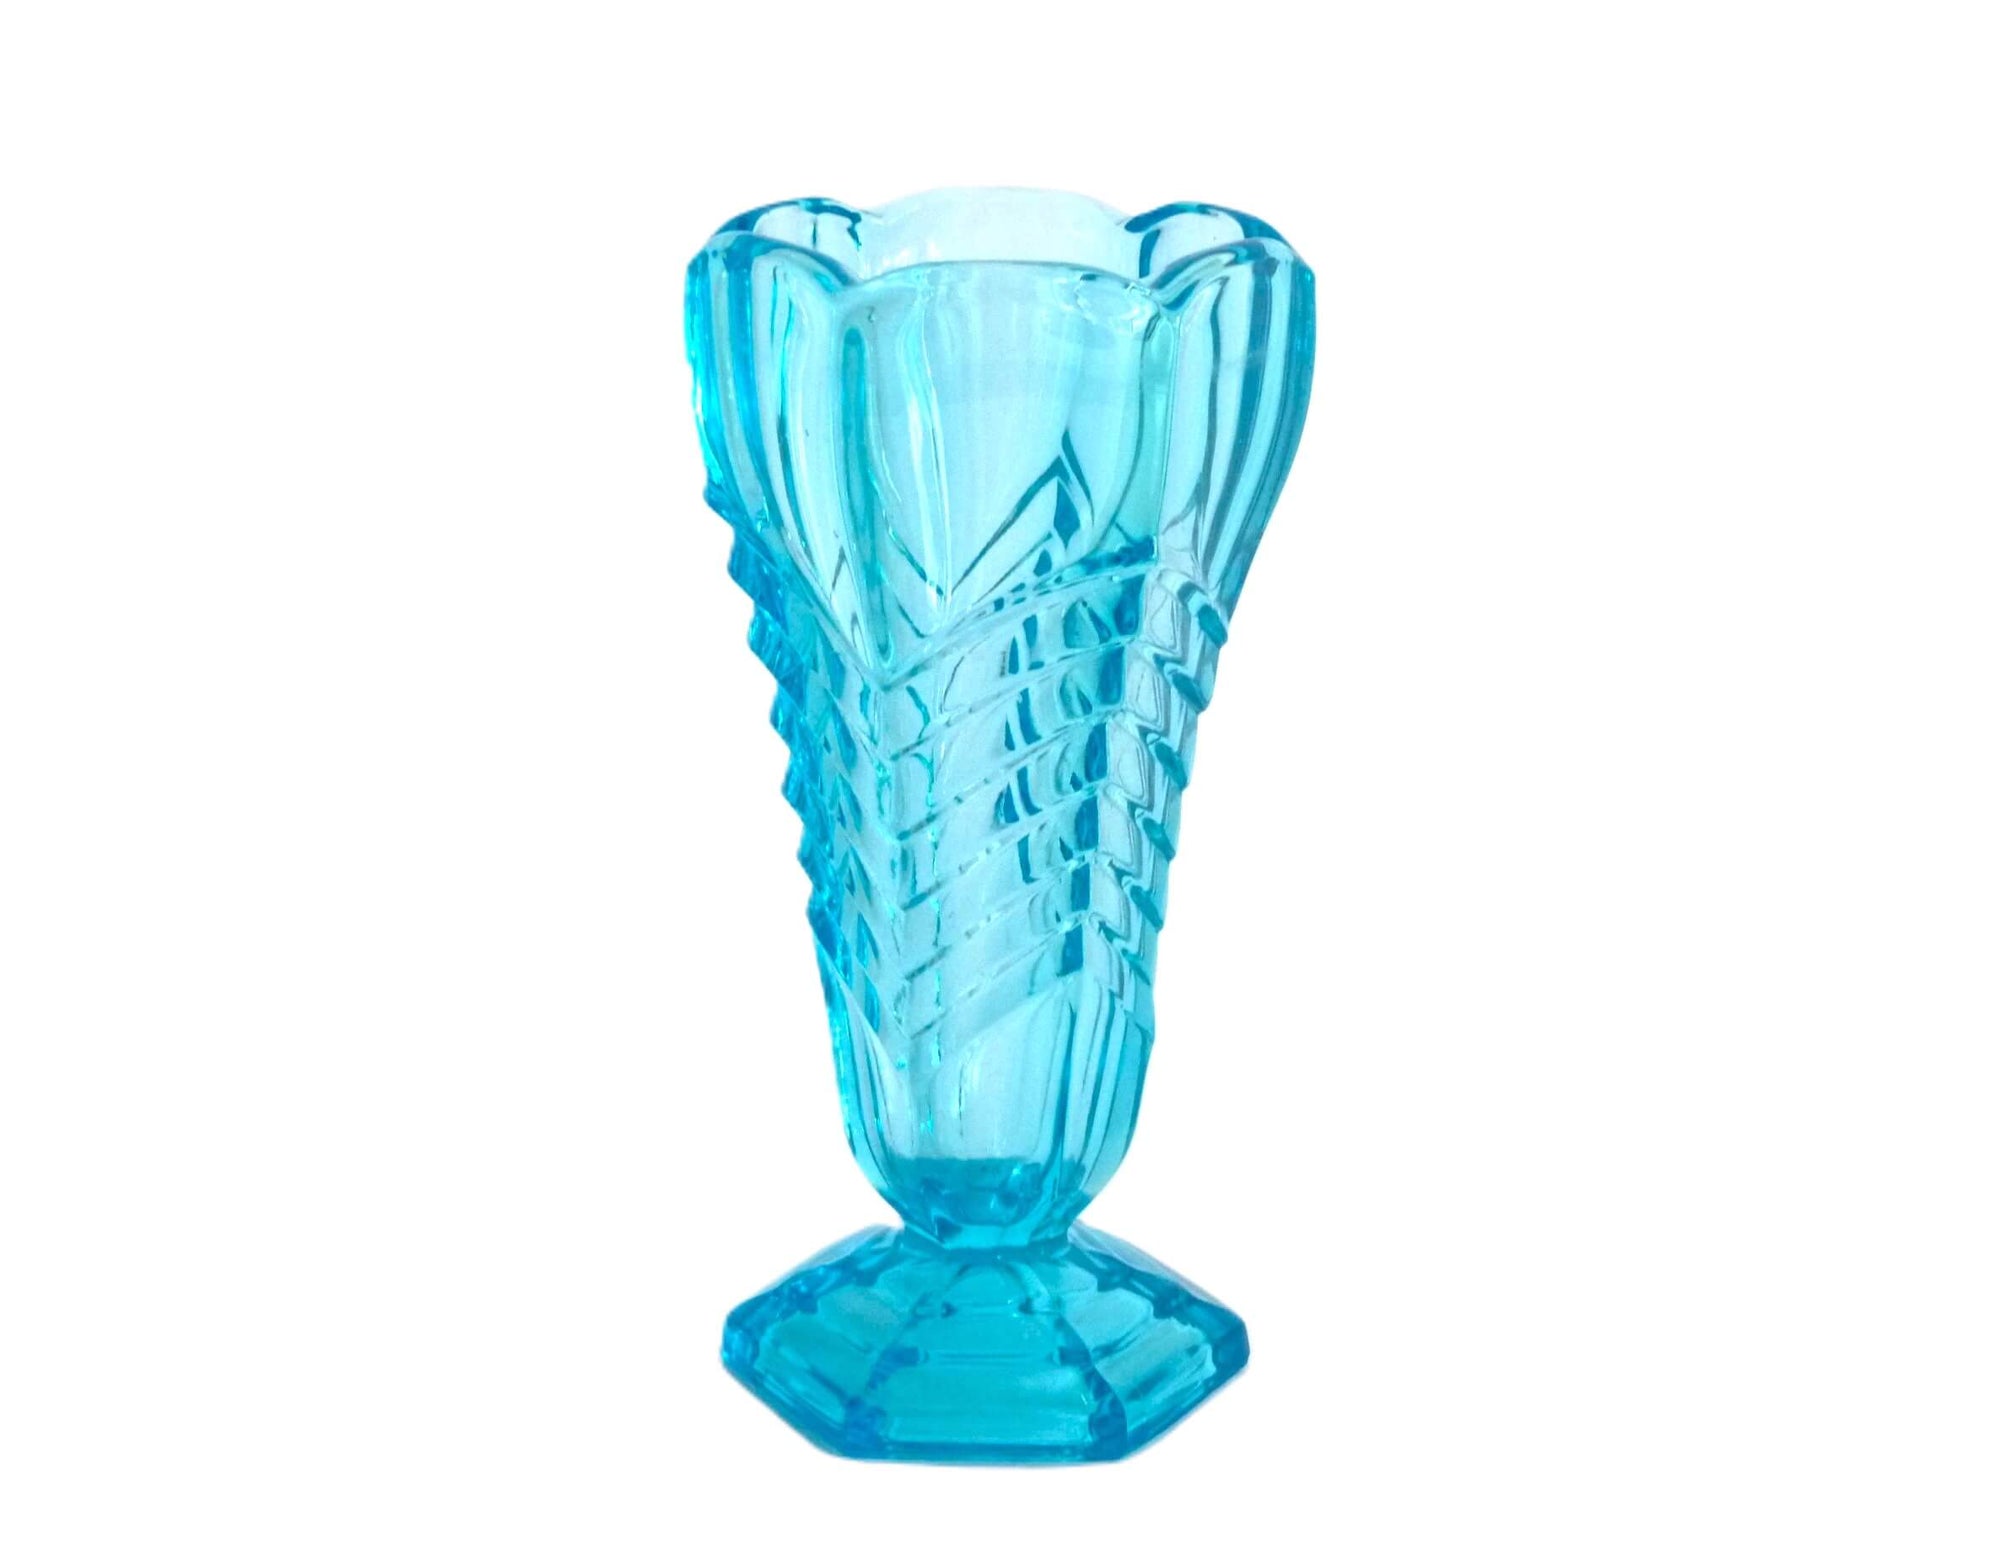 A deep teal blue coloured vase with an Art Deco Chevron  design cut into the glass around the body of the vase.